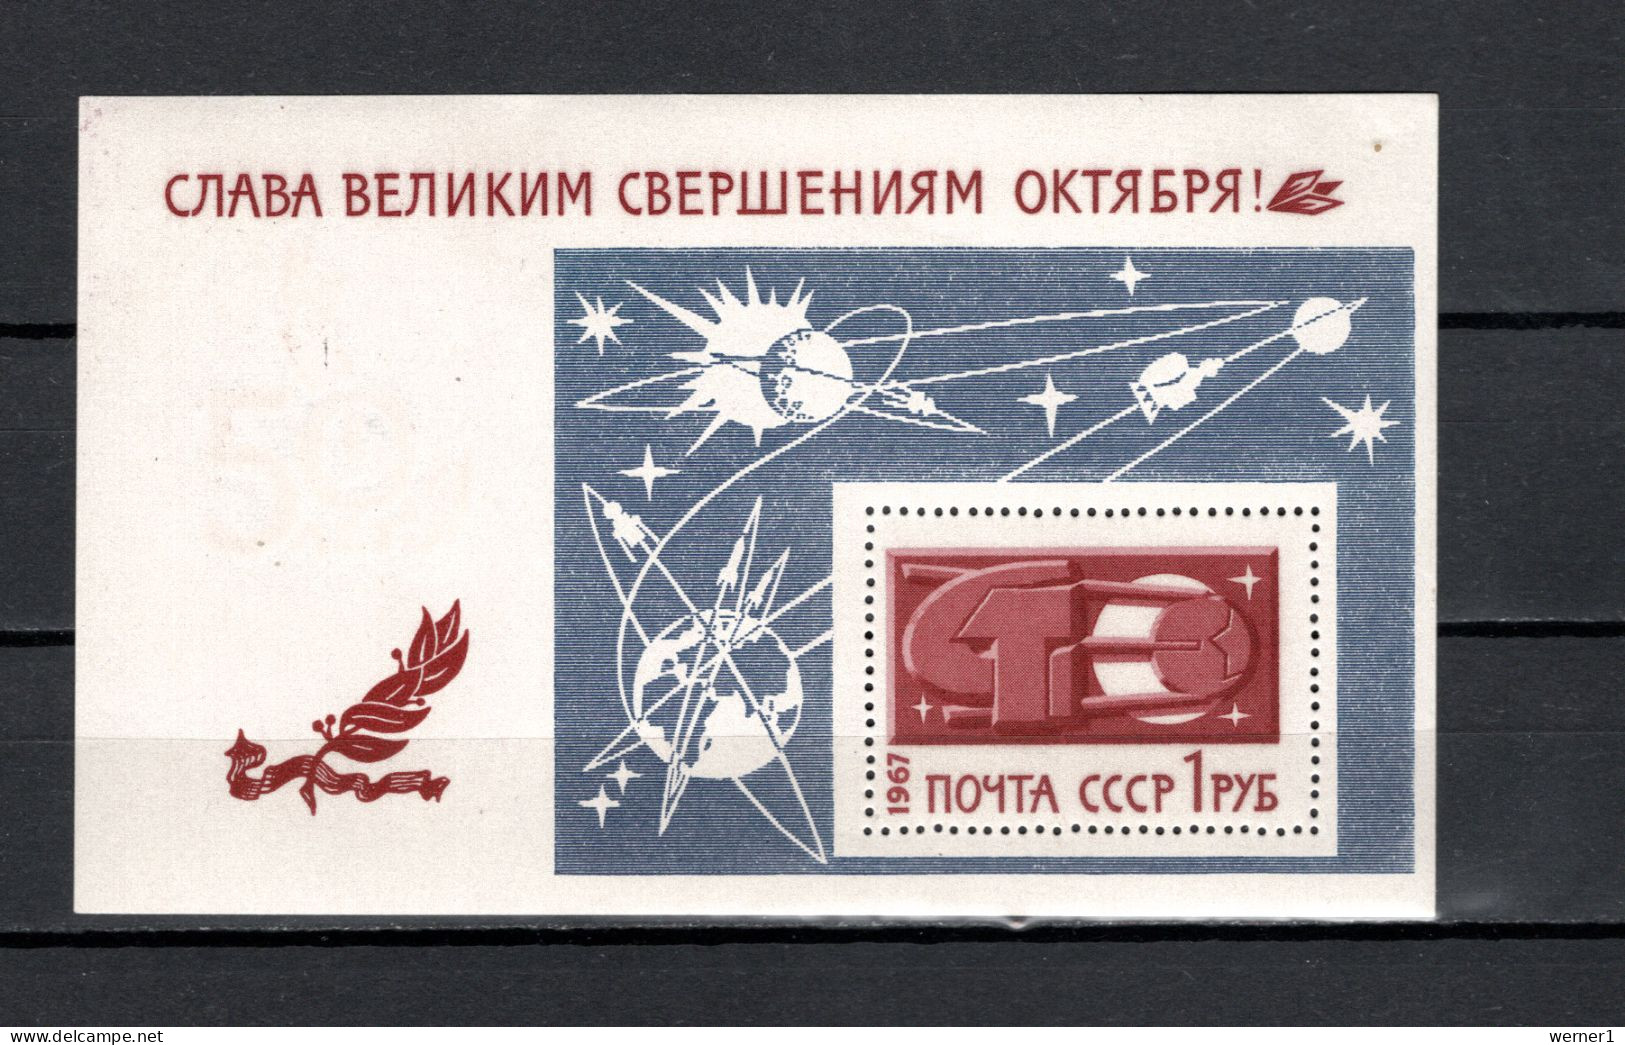 USSR Russia 1967 Space, October Revolution 50th Anniversary S/s MNH - Rusia & URSS